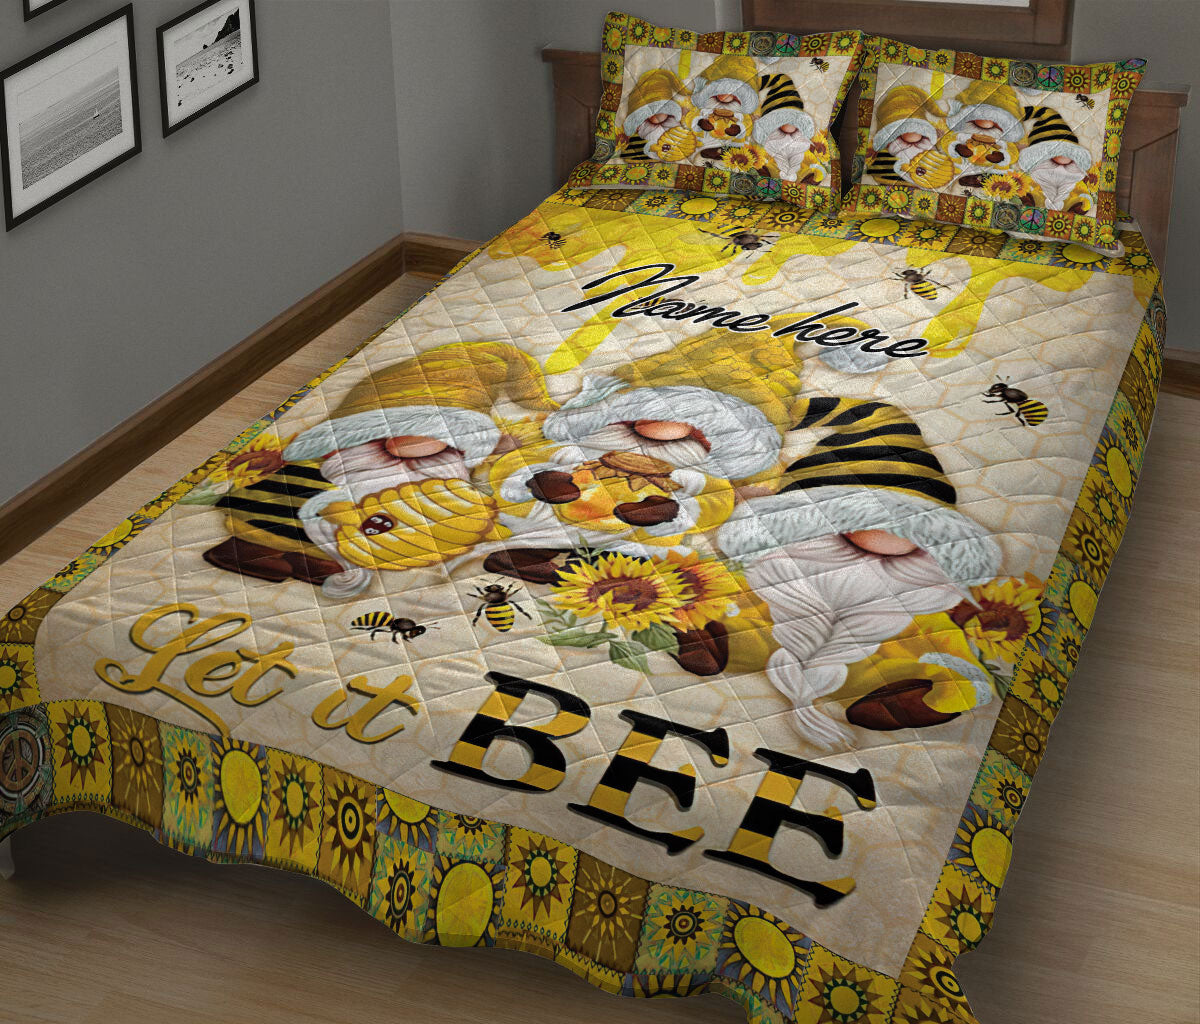 Ohaprints-Quilt-Bed-Set-Pillowcase-Bumble-Honey-Bee-Let-It-Bee-Gnome-Yellow-Sunflower-Custom-Personalized-Name-Blanket-Bedspread-Bedding-2480-King (90'' x 100'')